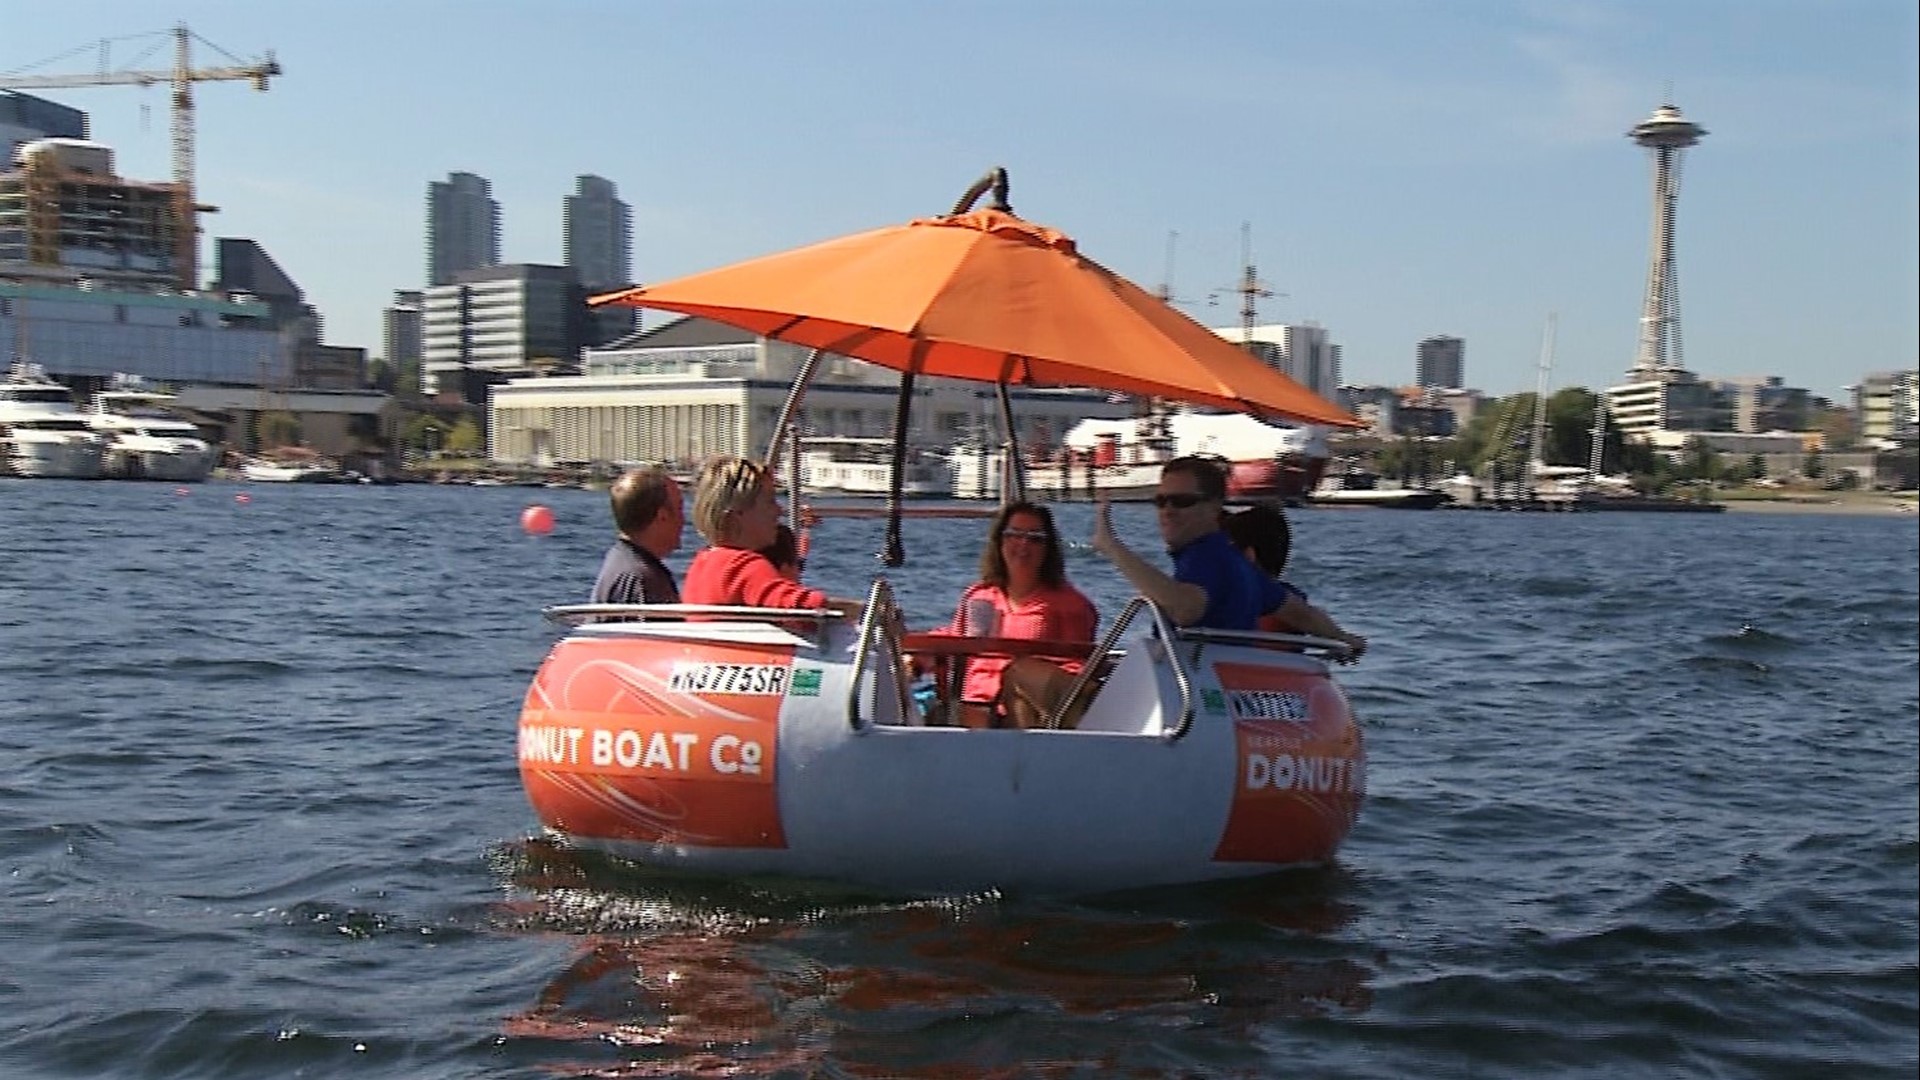 The rental vessels seat up to 8 and can be driven by anyone 25 and over. #k5evening